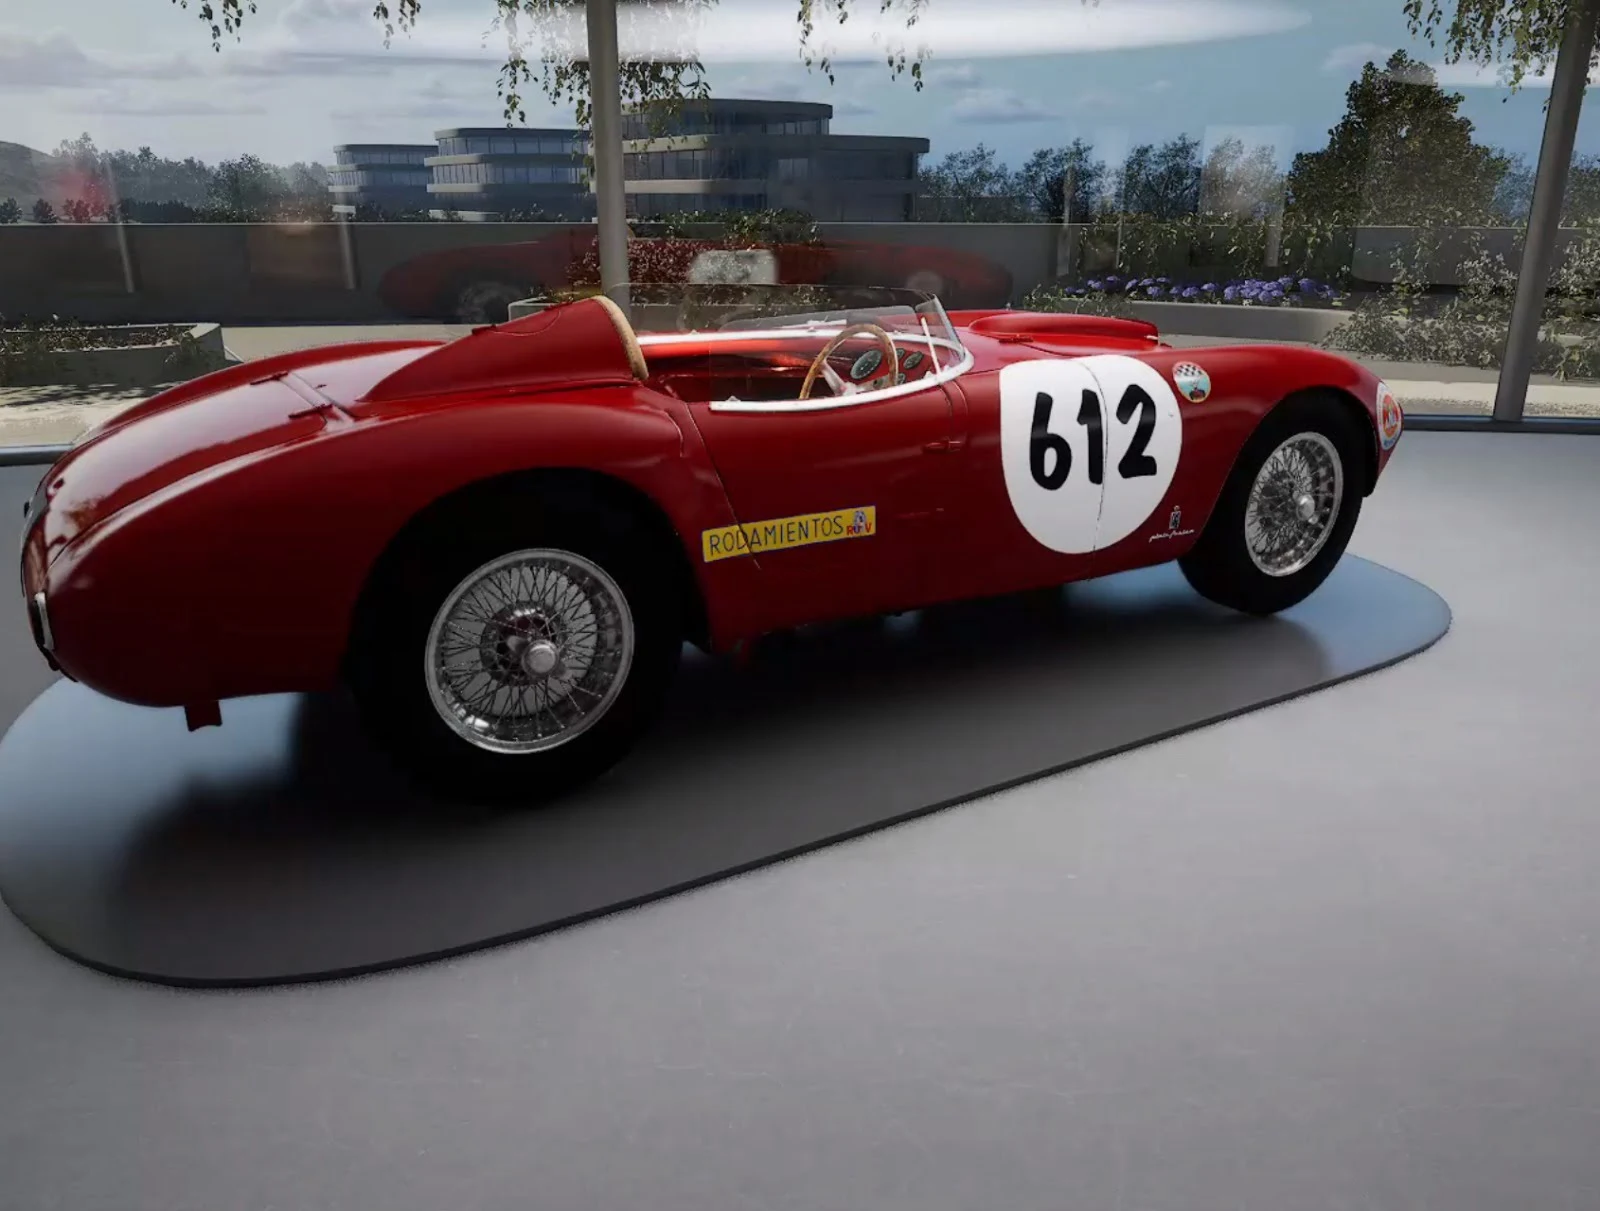 MAUTO and Roarington: one more big news. The digital twin of the Lancia D24 has arrived. Not to be missed. - 4